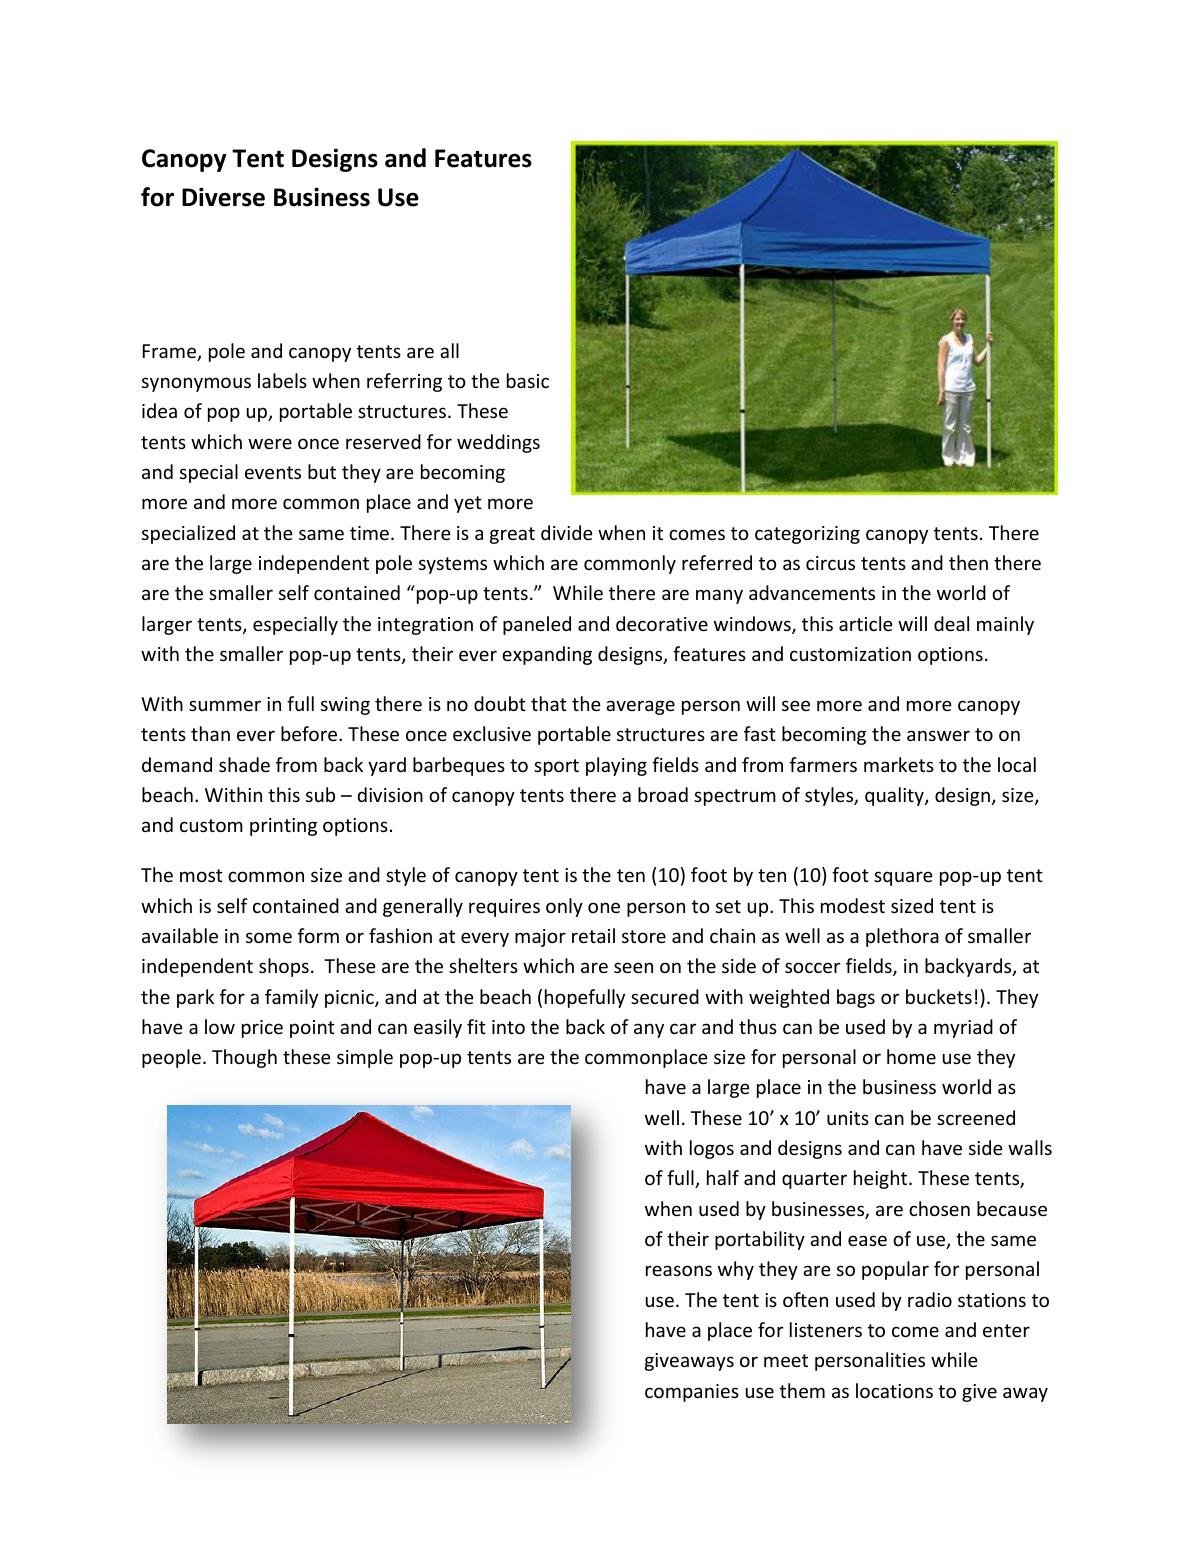 Canopy Tent Designs and Features for Diverse Business Use